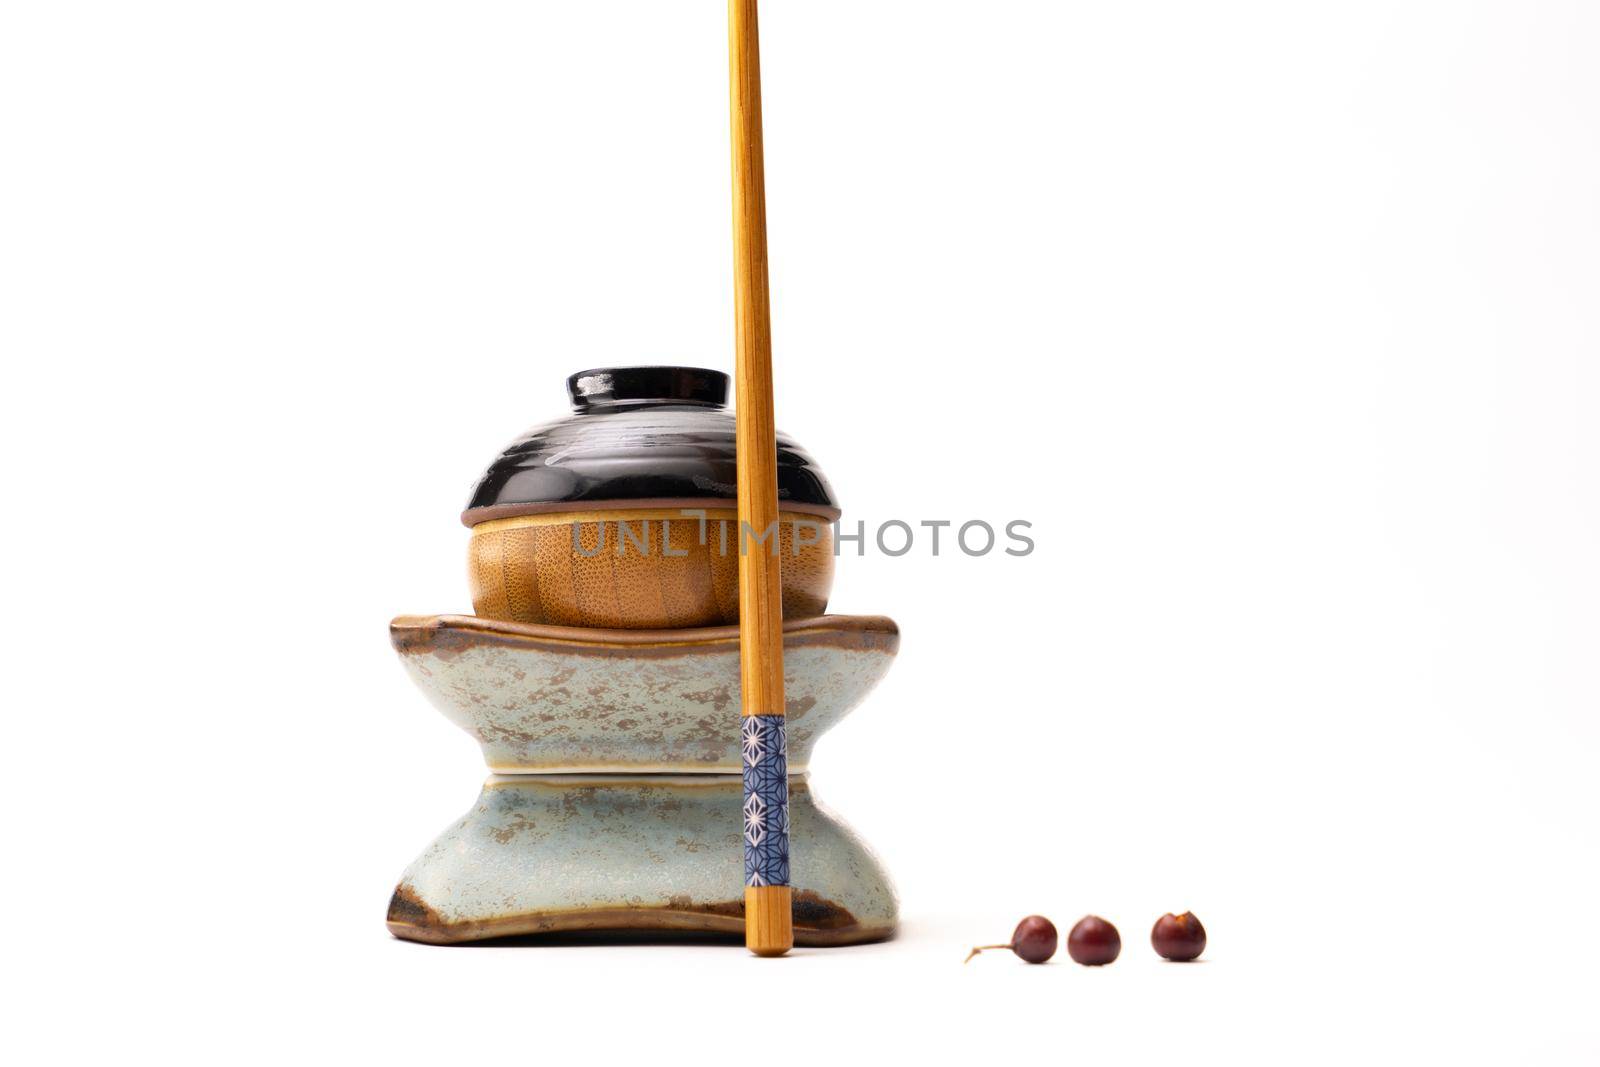 Still life of a japanese figure built from cups and a chopstick isolated on a white background by LeoniekvanderVliet